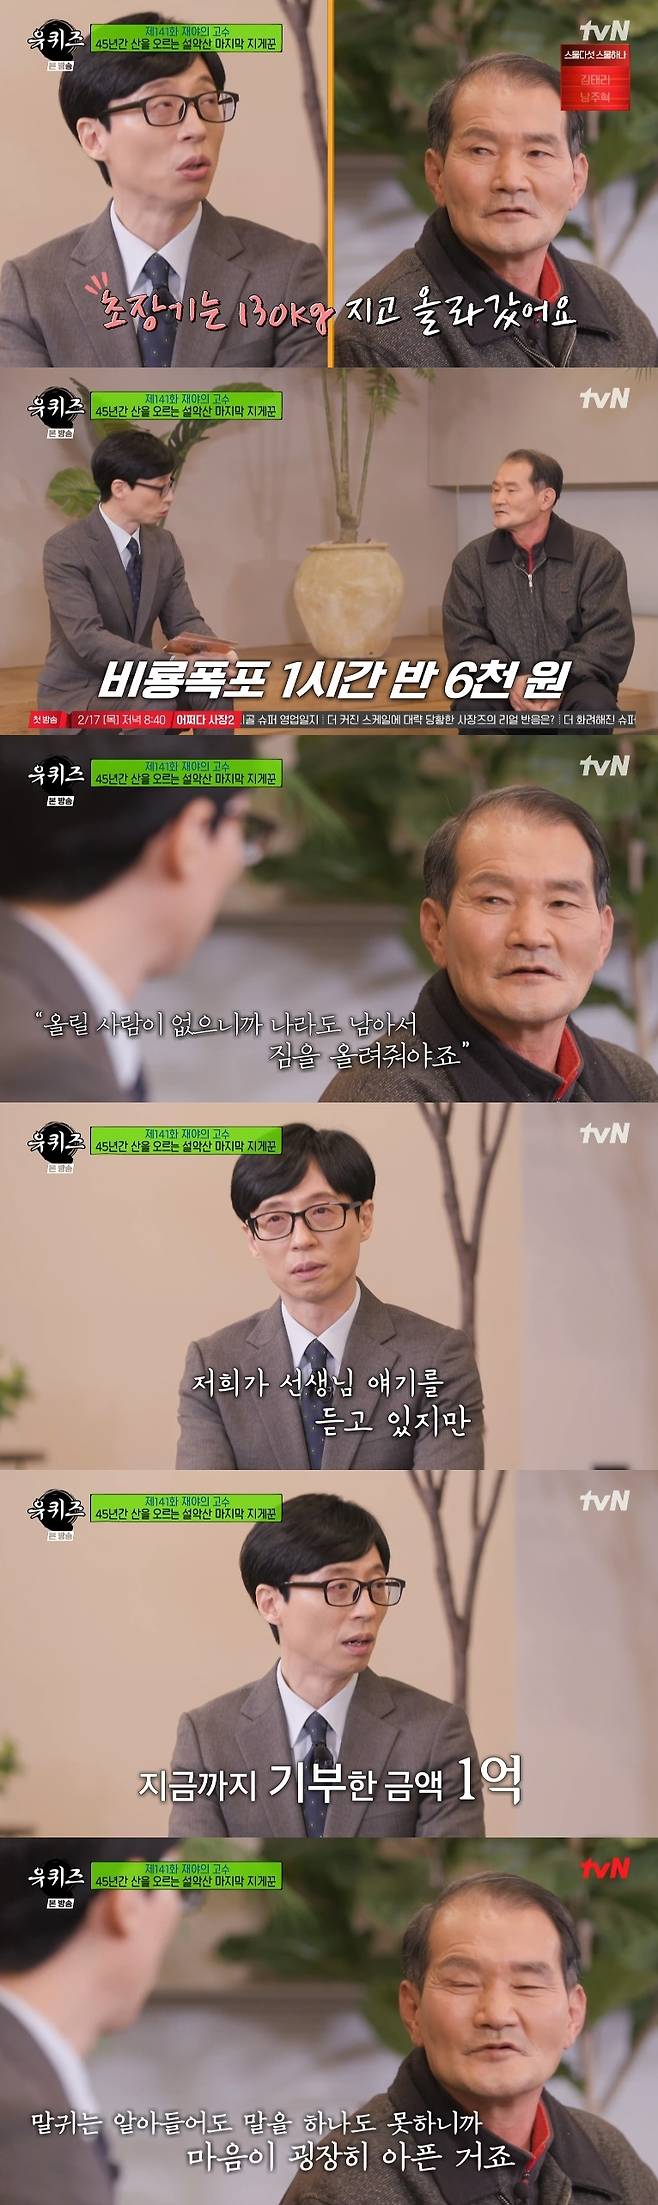 Yoo Jae-Suk was blinded by the story of the last Seoraksan who helped others even in difficult circumstances.On TVN You Quiz on the Block, which was broadcast on February 9, Seoraksan writer Lim Ki-jong appeared in a special feature of Jae-yas Kosu.The last remaining Seoraksan contractor, Lim Jong-jong, has been working as a loser since he was 16 years old and has been carrying his baggage to the mountain for 45 years.Lim Jong-jong, who flew 120 ~ 130kg ice cream refrigerator to the mountain in the early days, said he has now reduced to 60kg.When Yoo Jae-Suk and Jo Se-ho were surprised at the situation that they moved 60kg of luggage to the mountain with a small body of 158cm and 62kg at the age of 60, Lim said, I had superhuman power.No one can do it.It takes about an hour to reach the rocky rocks with a distance of 1.7km, and it takes six hours to climb the Daechungbong.When asked about the amount of money MCs received according to the streets, Lim Jong said that 20,000 won for rocking rock, 8,000 won for non-ship, 6,000 won for Biryong Falls and 250,000 won for Daechungbong.It takes 6 hours to climb with 250,000 won, 4 hours to come down, 10 hours in total, so it can never be said to be a lot of money.If you have an uphill, you have a downhill, and so do the mountains. High mountains are not so bad, and so is life, said Lim Ki-jong, who is well-adjusted and bearable.When asked why he was left alone as a loser, Lim said, I do not have anyone to raise it, so I have to stay and raise it.I think I should do it until 70, so I am silent. Lim Ki-jong, who had to close his dream of a marathoner because of his difficulty, is working on a construction site for a living due to the decrease in income due to the closure of the cabin.Here, my wife has a disability and it is difficult to act alone.But Lim has been doing good deeds for 24 years, with the donation amount exceeding 100 million won. I bring childrens snacks or rice for the elderly living alone, said Lim.I didnt wear it and I did it. I got something for someone else. The joy was great. Yoo Jae-Suk blinked.